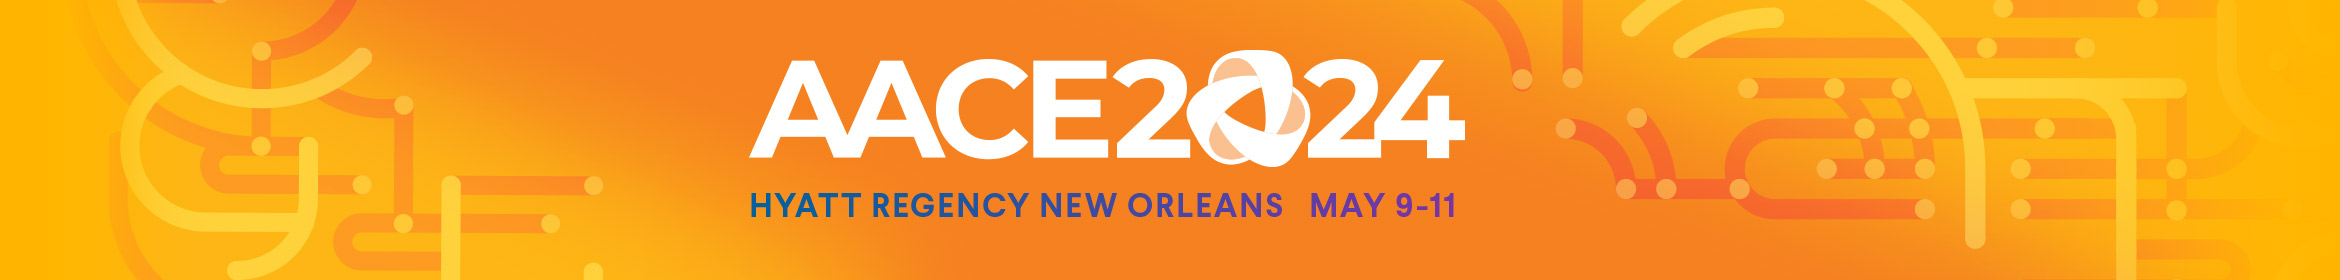 AACE 2024 Annual Meeting Main banner